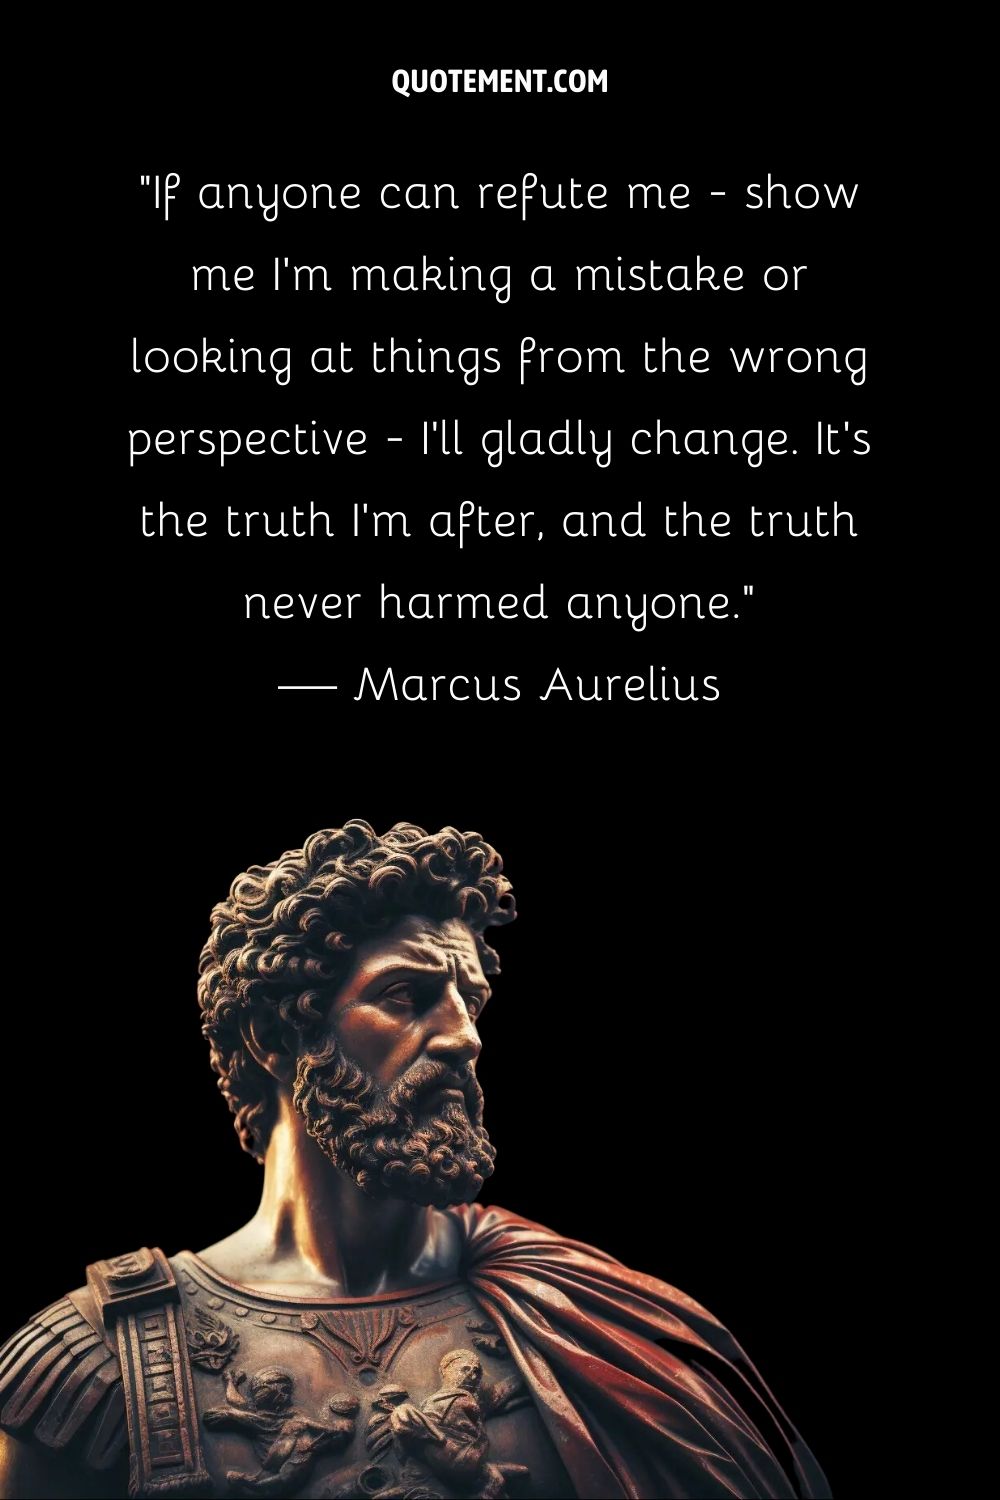 Enduring pose reveals the timeless wisdom of stoic philosophy.